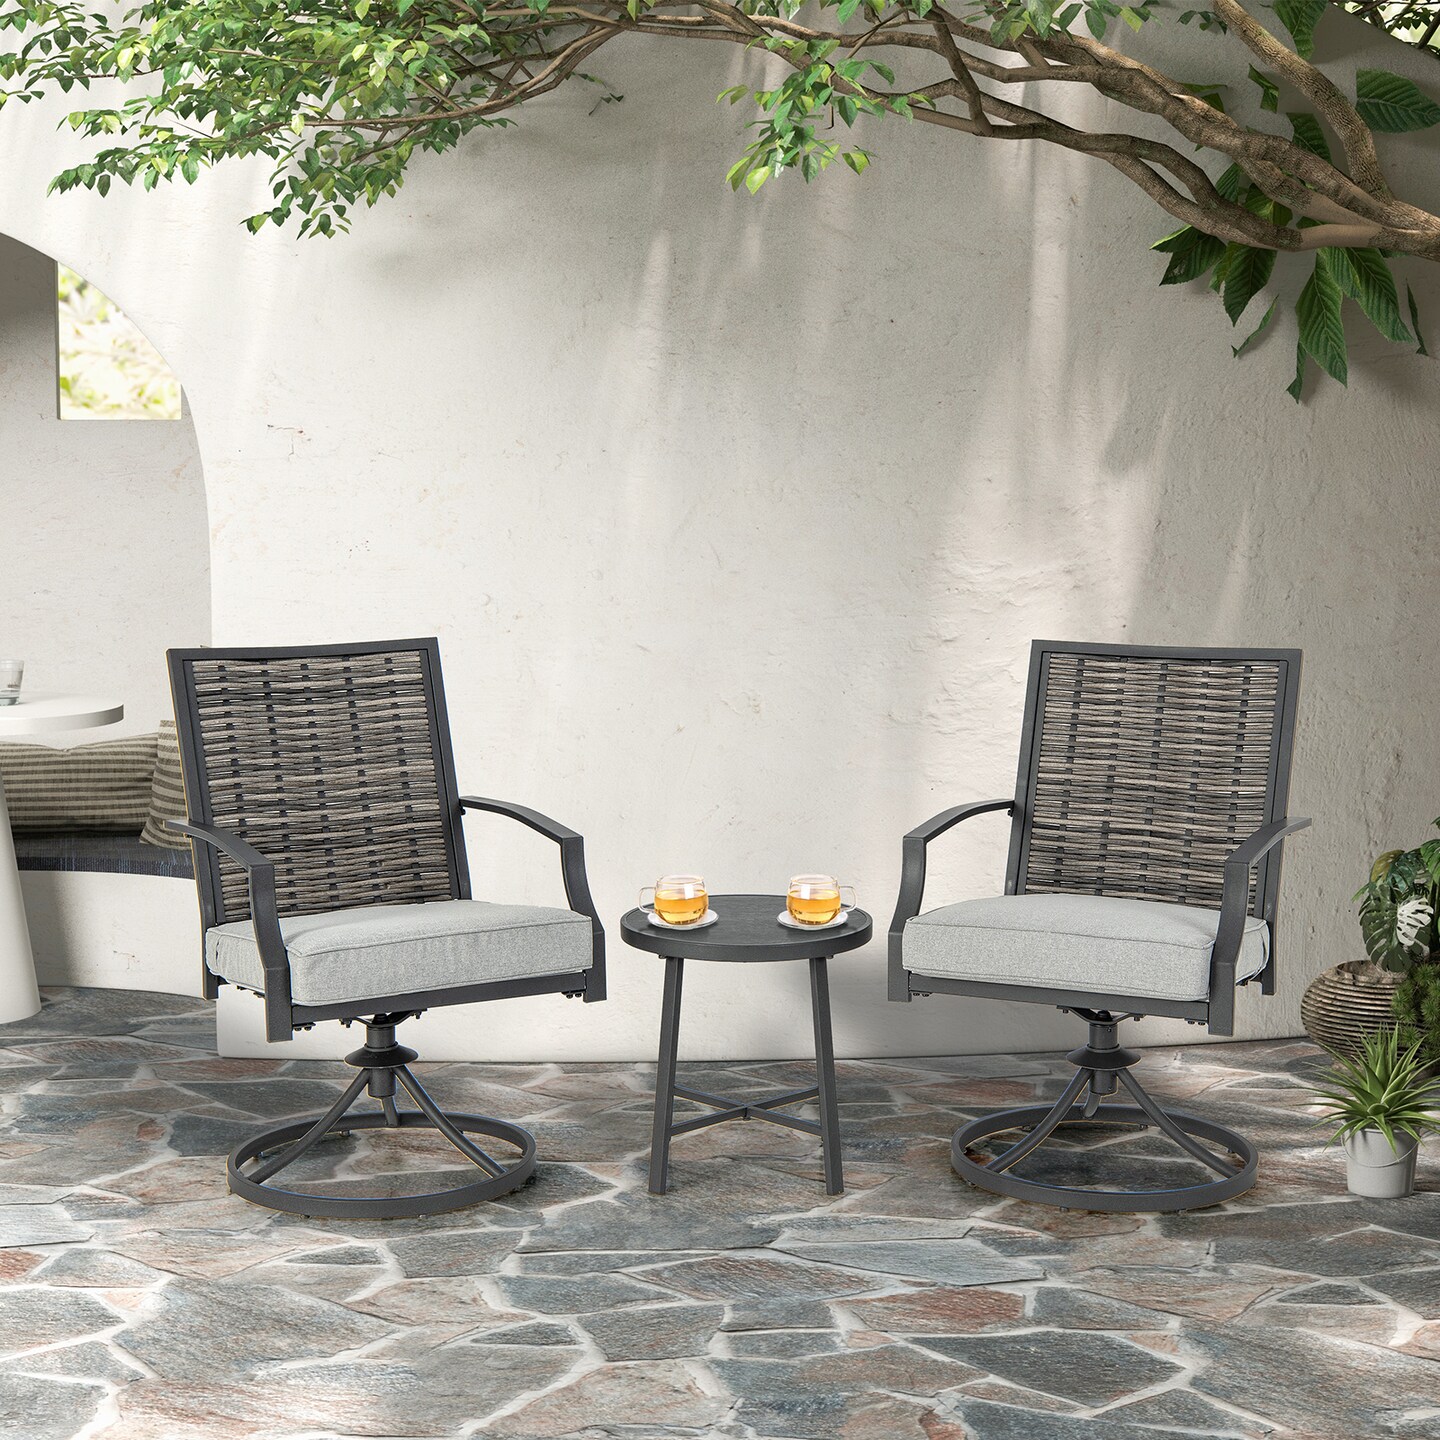 3 Piece Patio Swivel Chair Set With Soft Seat Cushions For Backyard